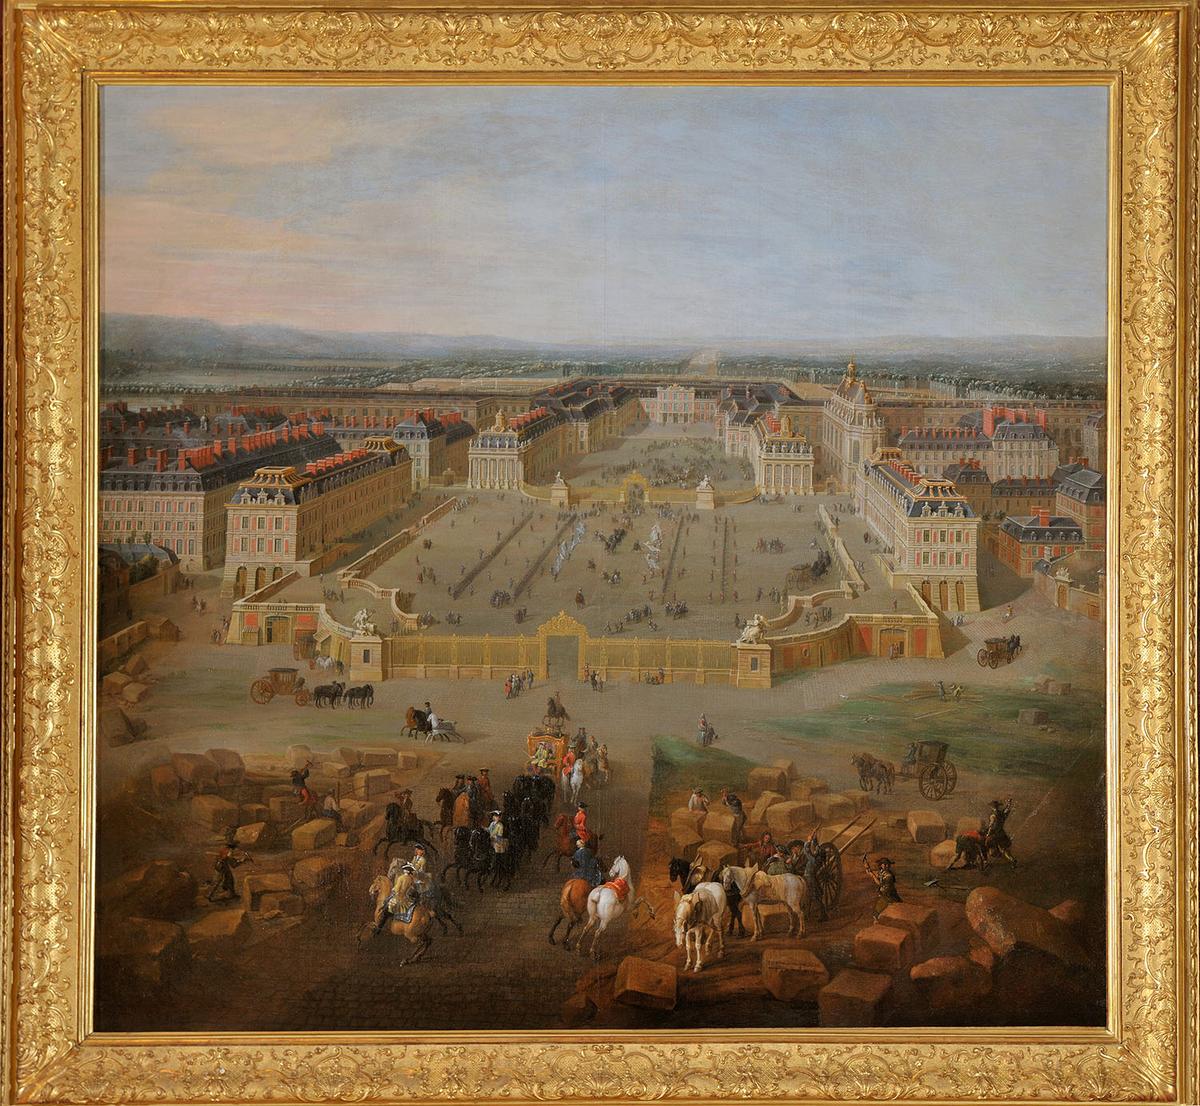 "View of the Château de Versailles From the Parade Grounds," 1722, by Pierre Denis Martin the Younger (French, 1663–1742). Oil on canvas, 54 3/4 inches by 59 inches. Musée National des Châteaux de Versailles et de Trianon, RMN-Grand Palais/Art Resource, New York. (Jean-Marc Manaï)